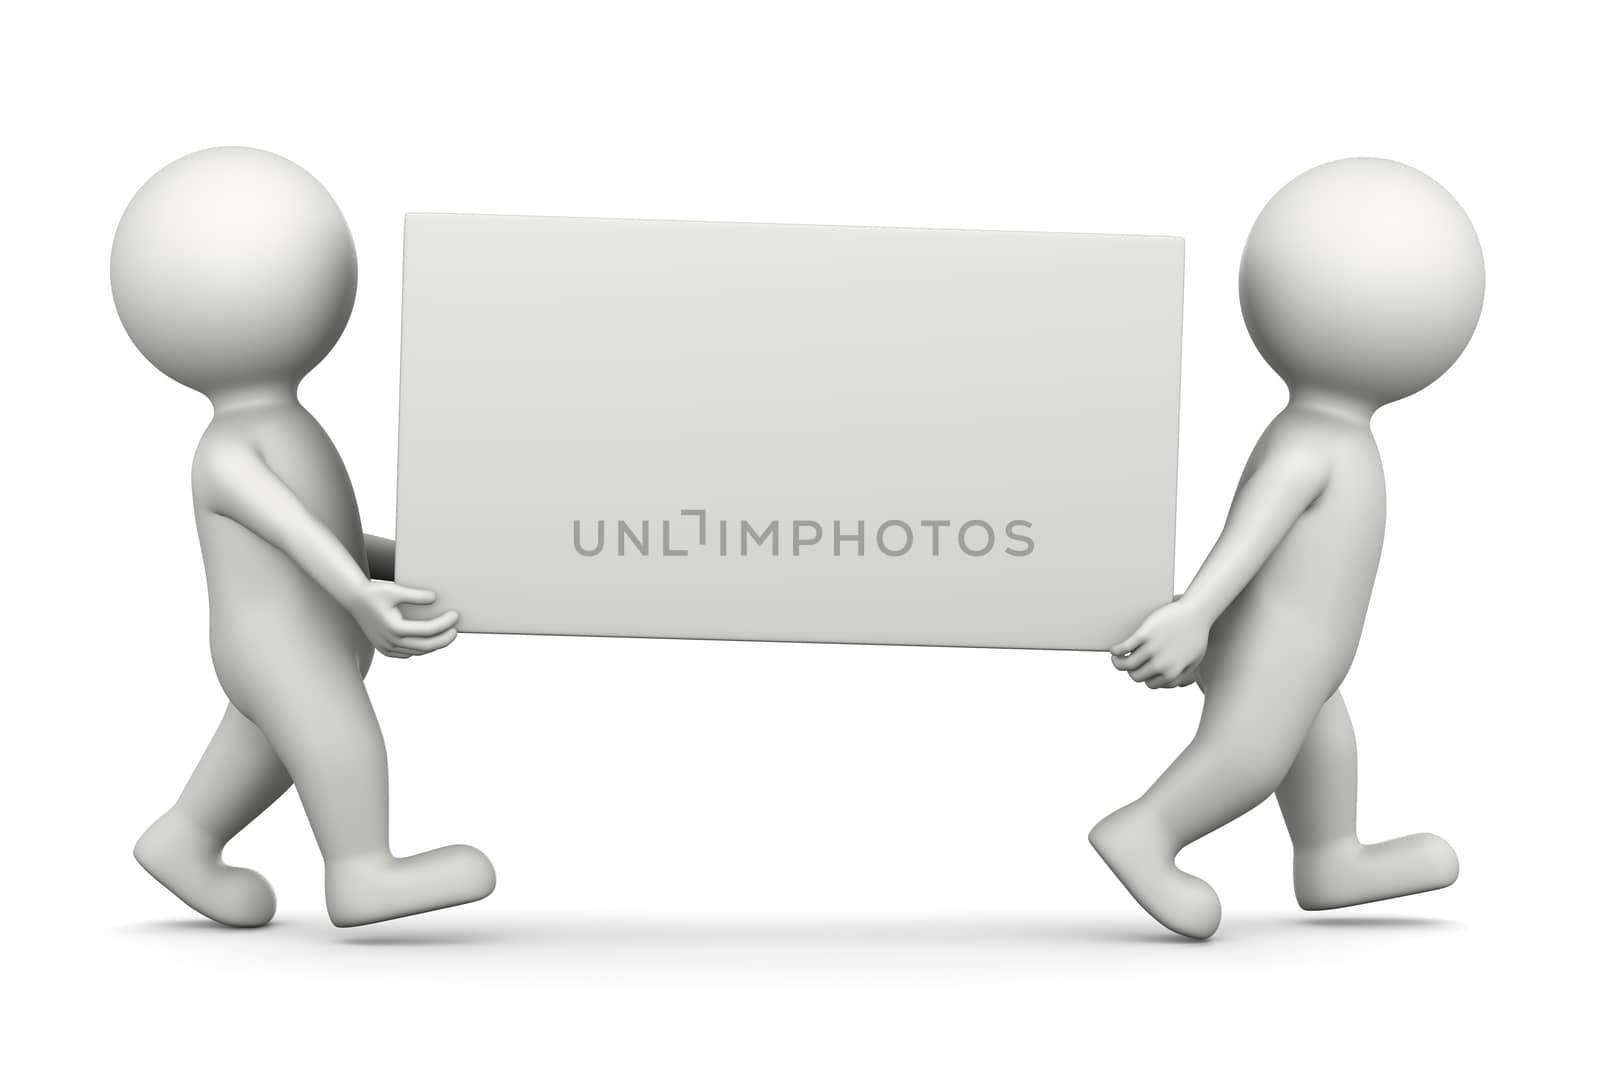 Two White 3D Characters Carrying a Blank Bill Illustration on White Background